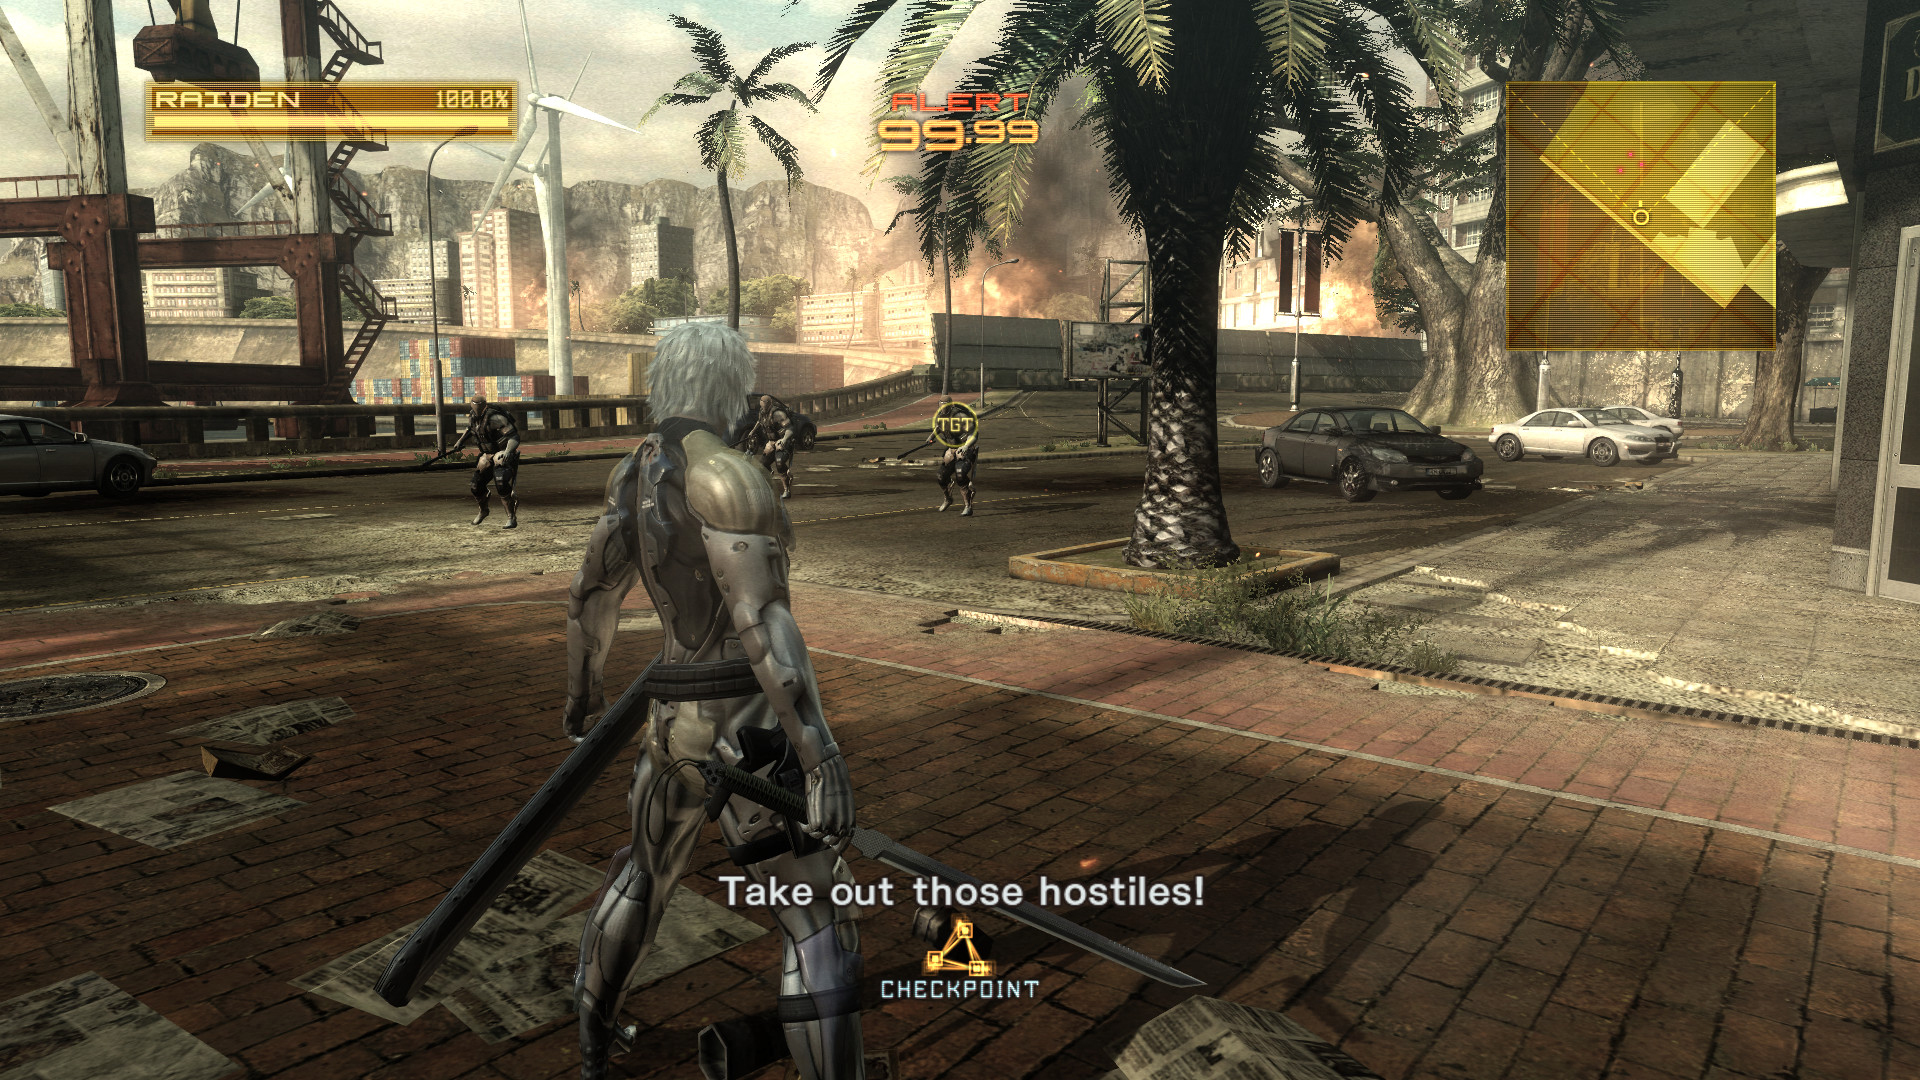 Konami's Blisteringly Intense, Metal Gear Rising: Revengeance, Slices  Through SHIELD - Android Authority